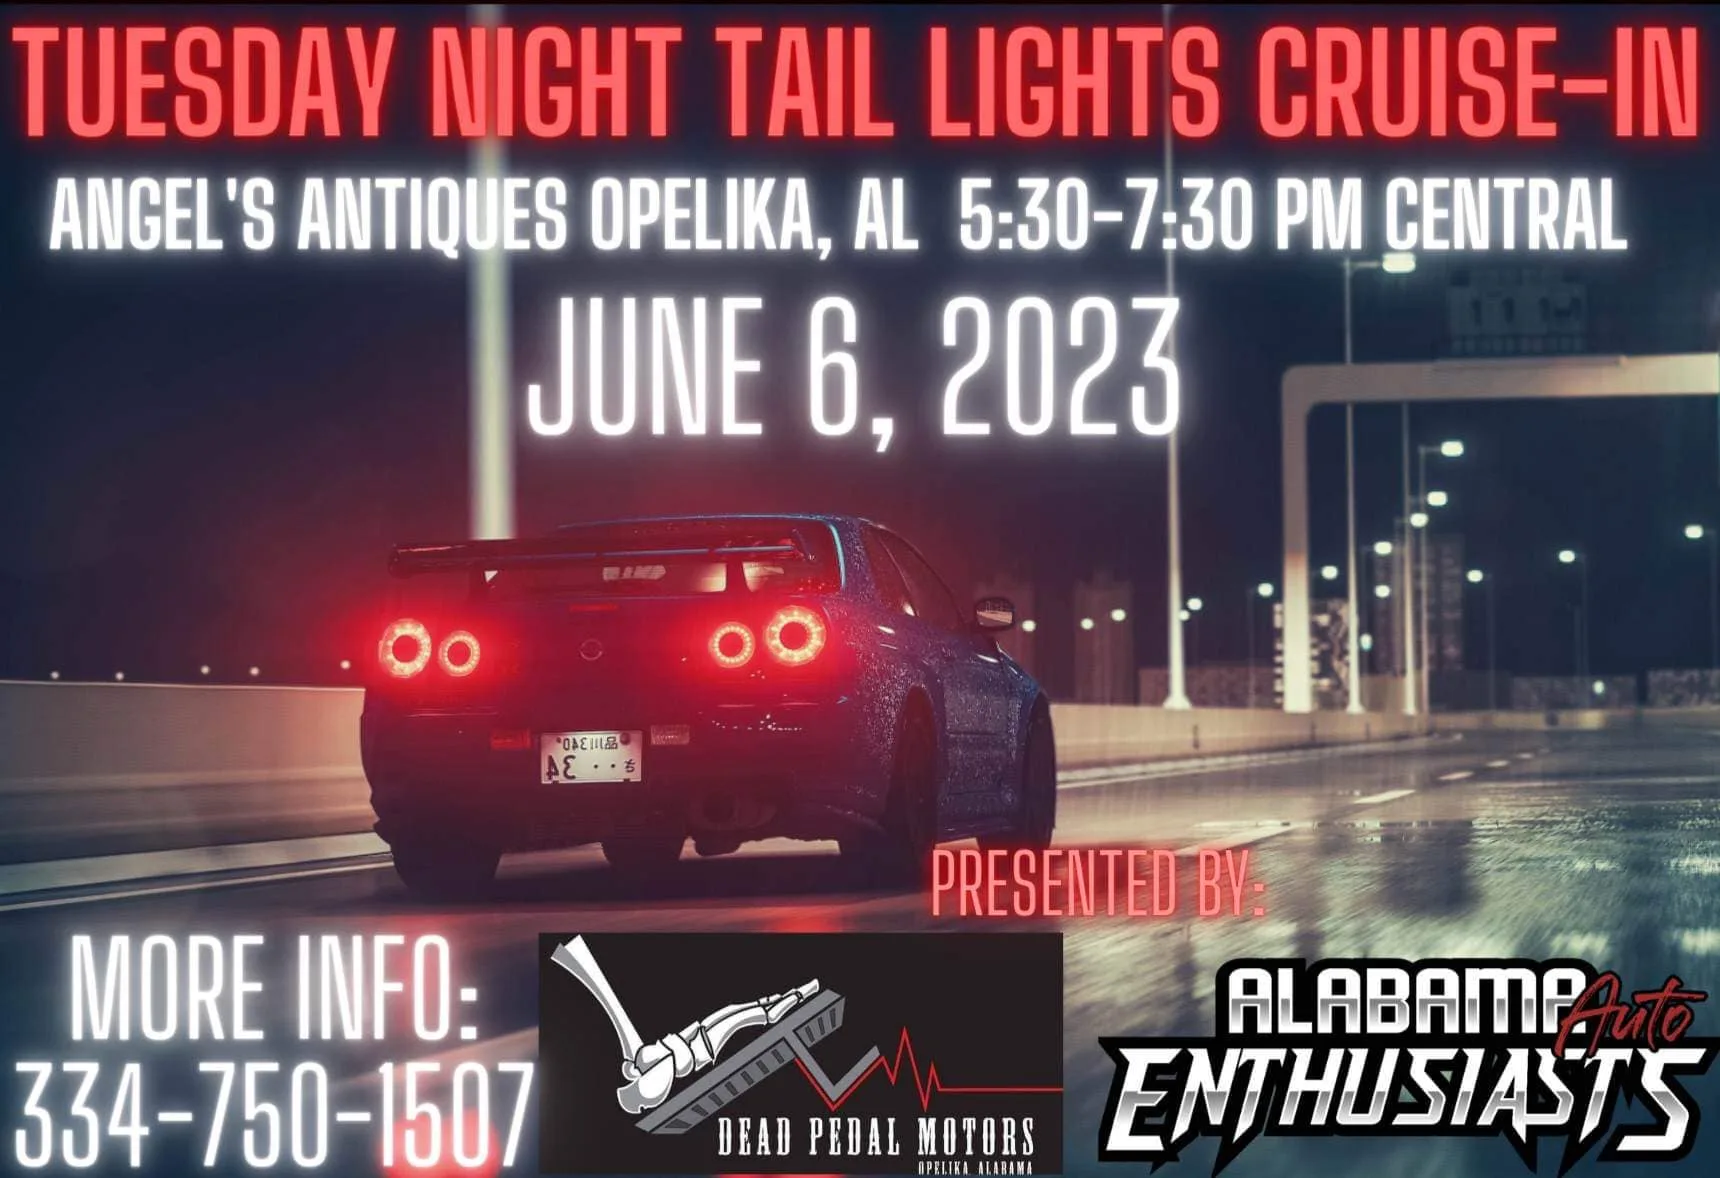 Tuesday Night Tail Lights Cruise-In